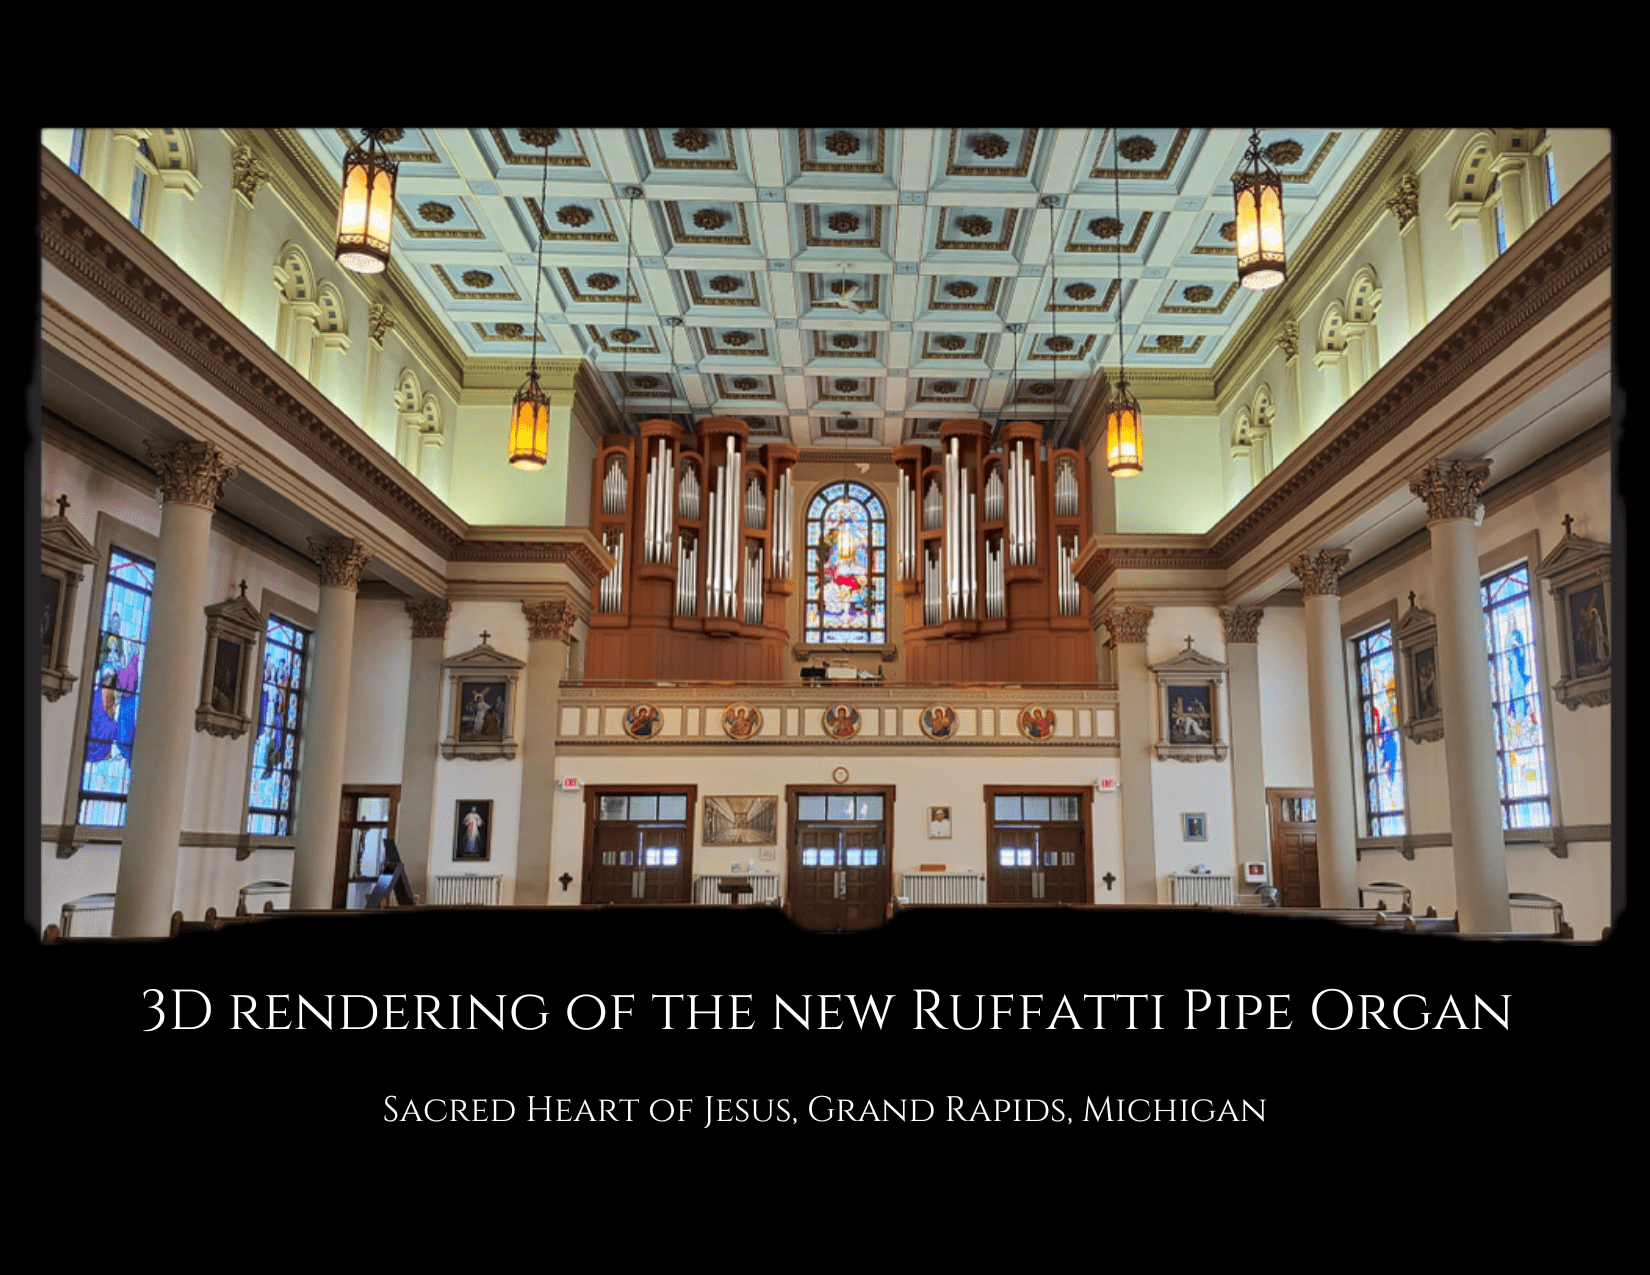 Sacred Heart will receive a new pipe organ